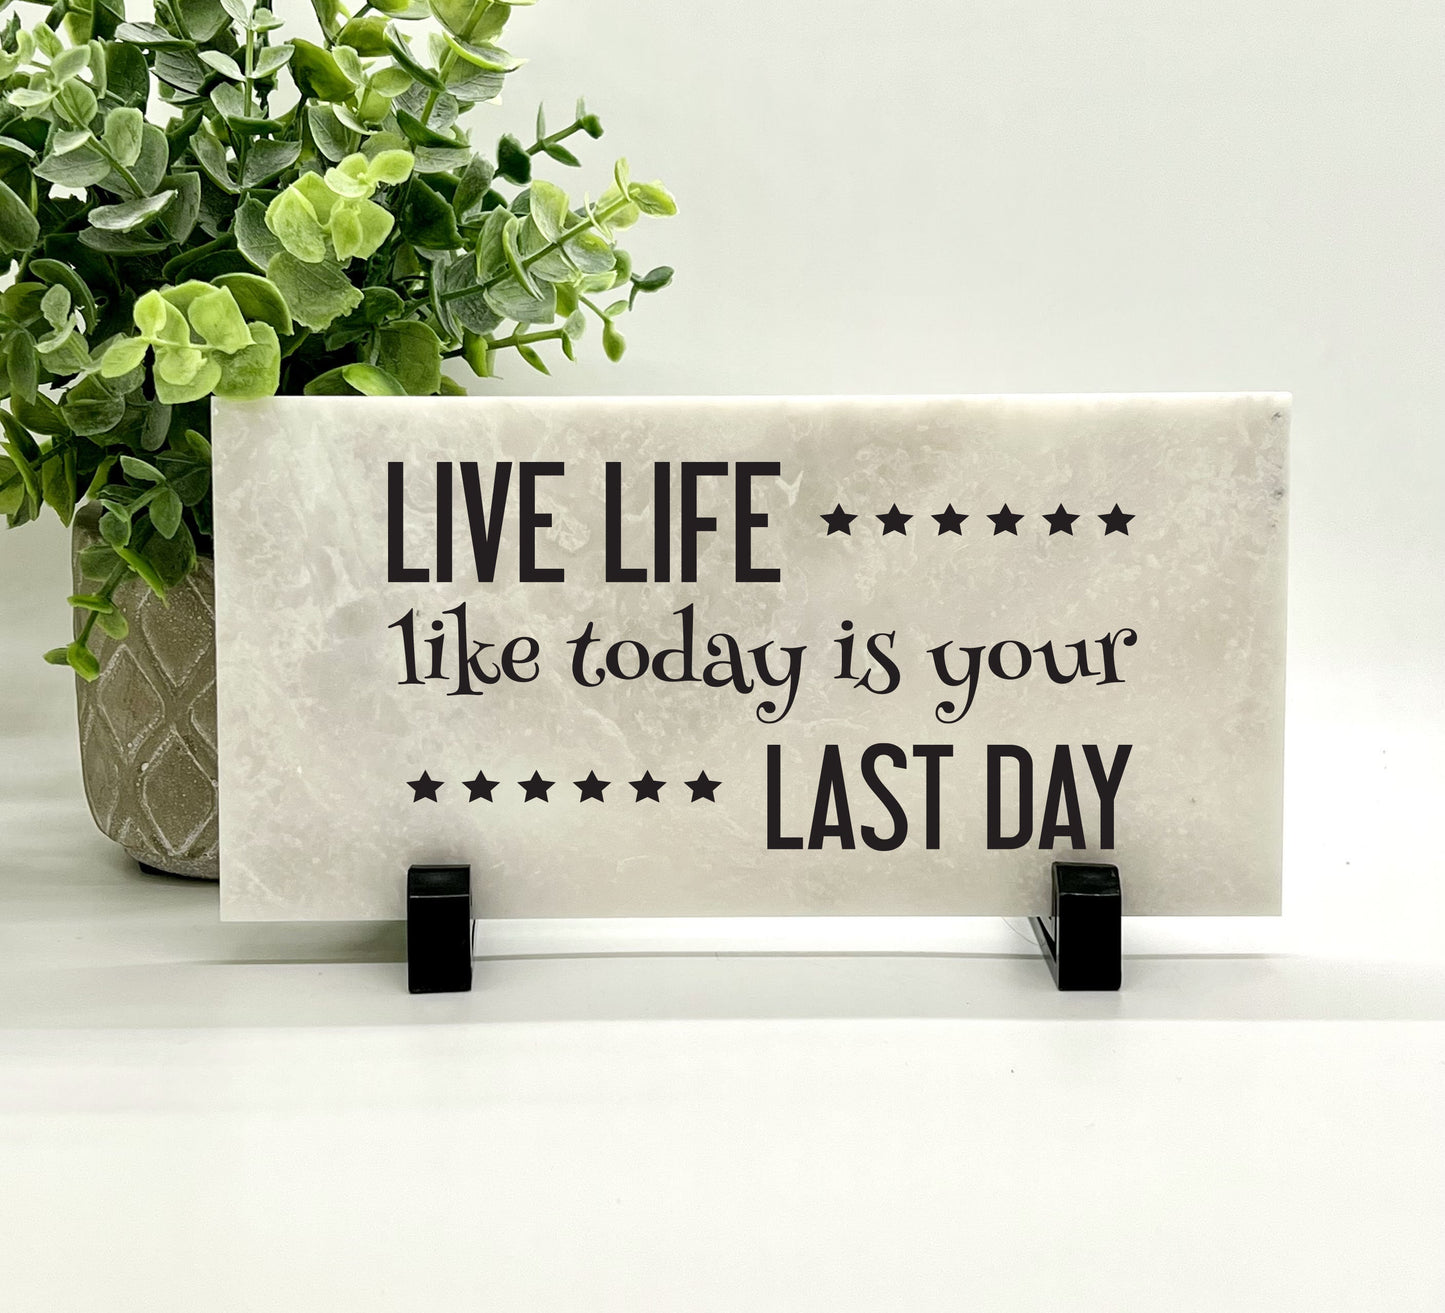 Live life like today is your last day -Motivational Stone- Motivational Sign - Inspirational Gift - Friends Gift - Family Gift -Stone Choice